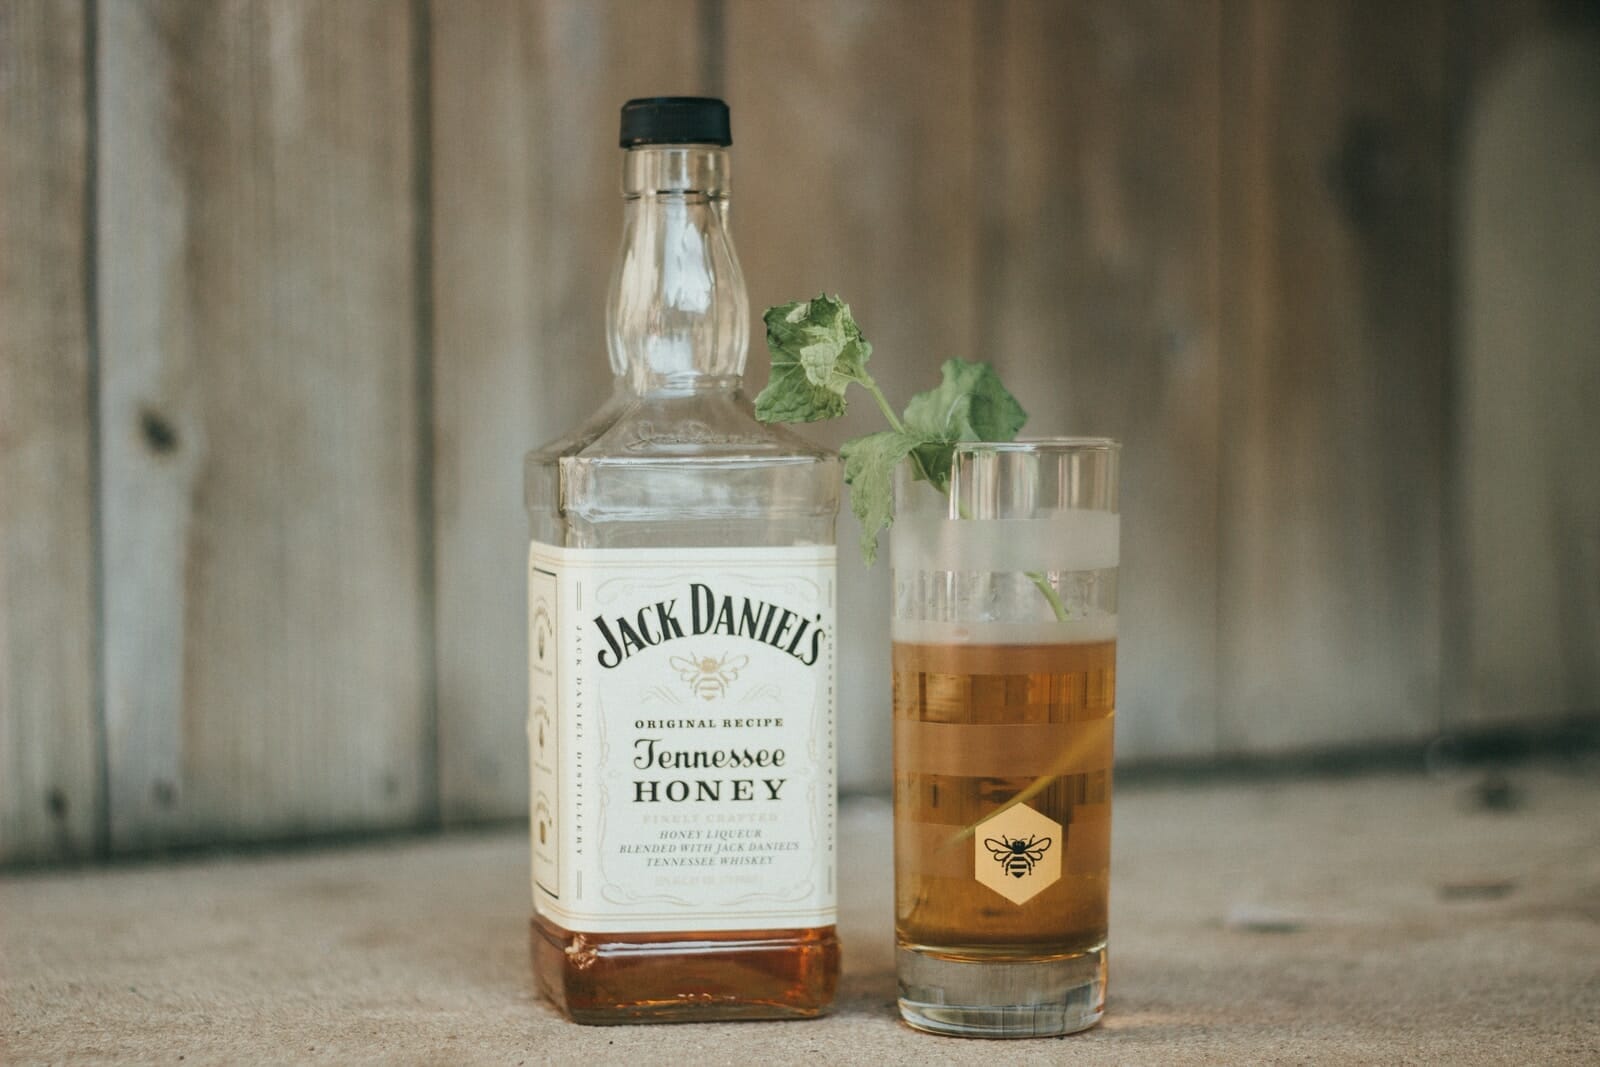 Jack Daniel’s Tennessee Whiskey is featured on The Jam